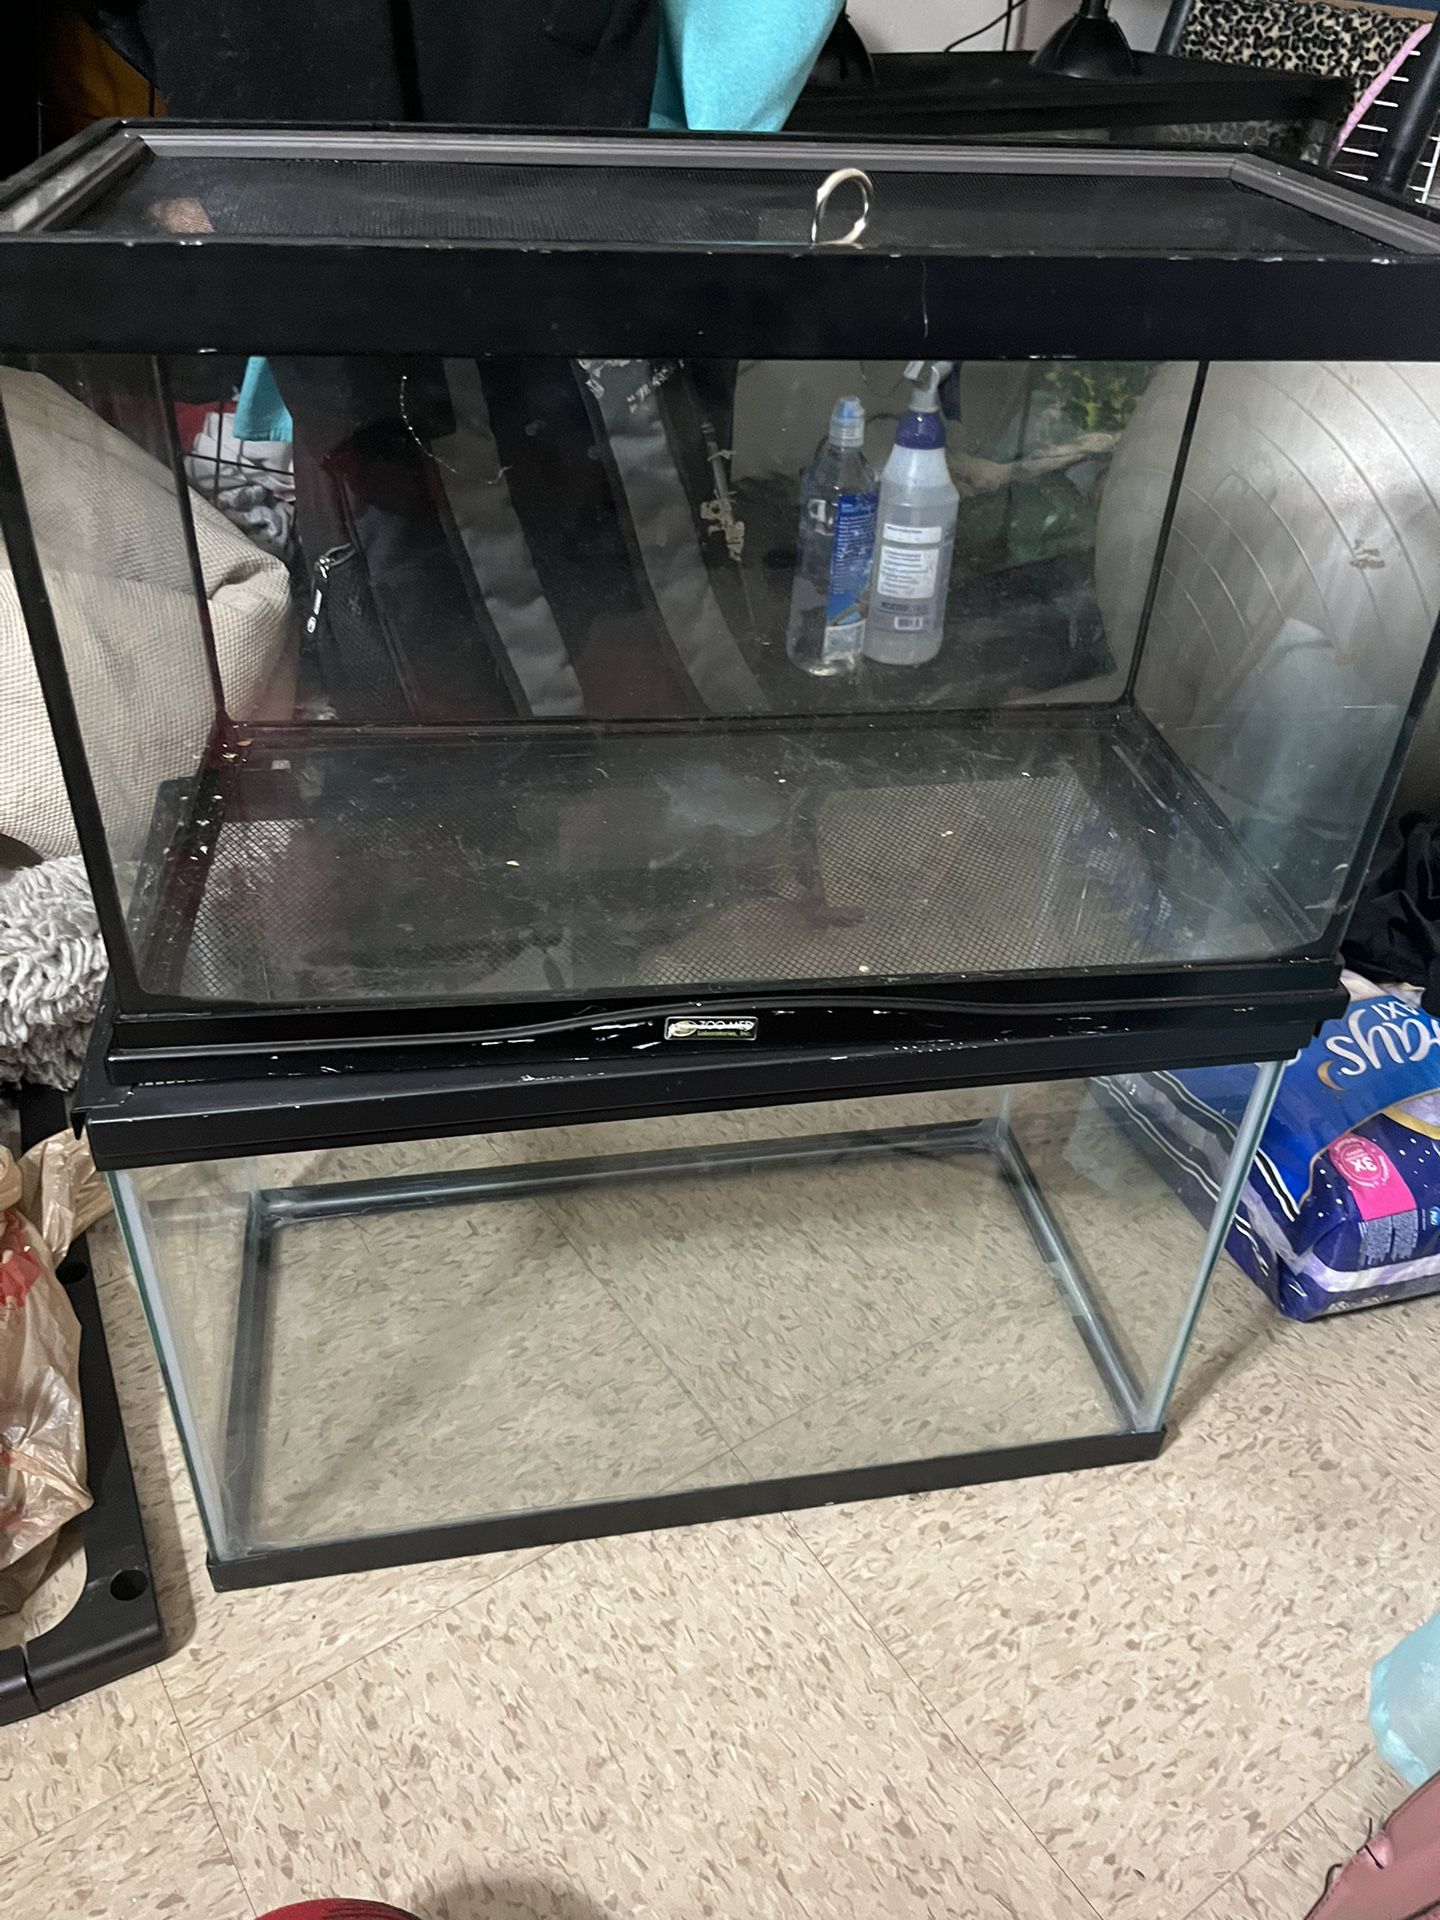 2 Reptile/ Pet/ Animal Cages/ Tanks. 10 Gallons 